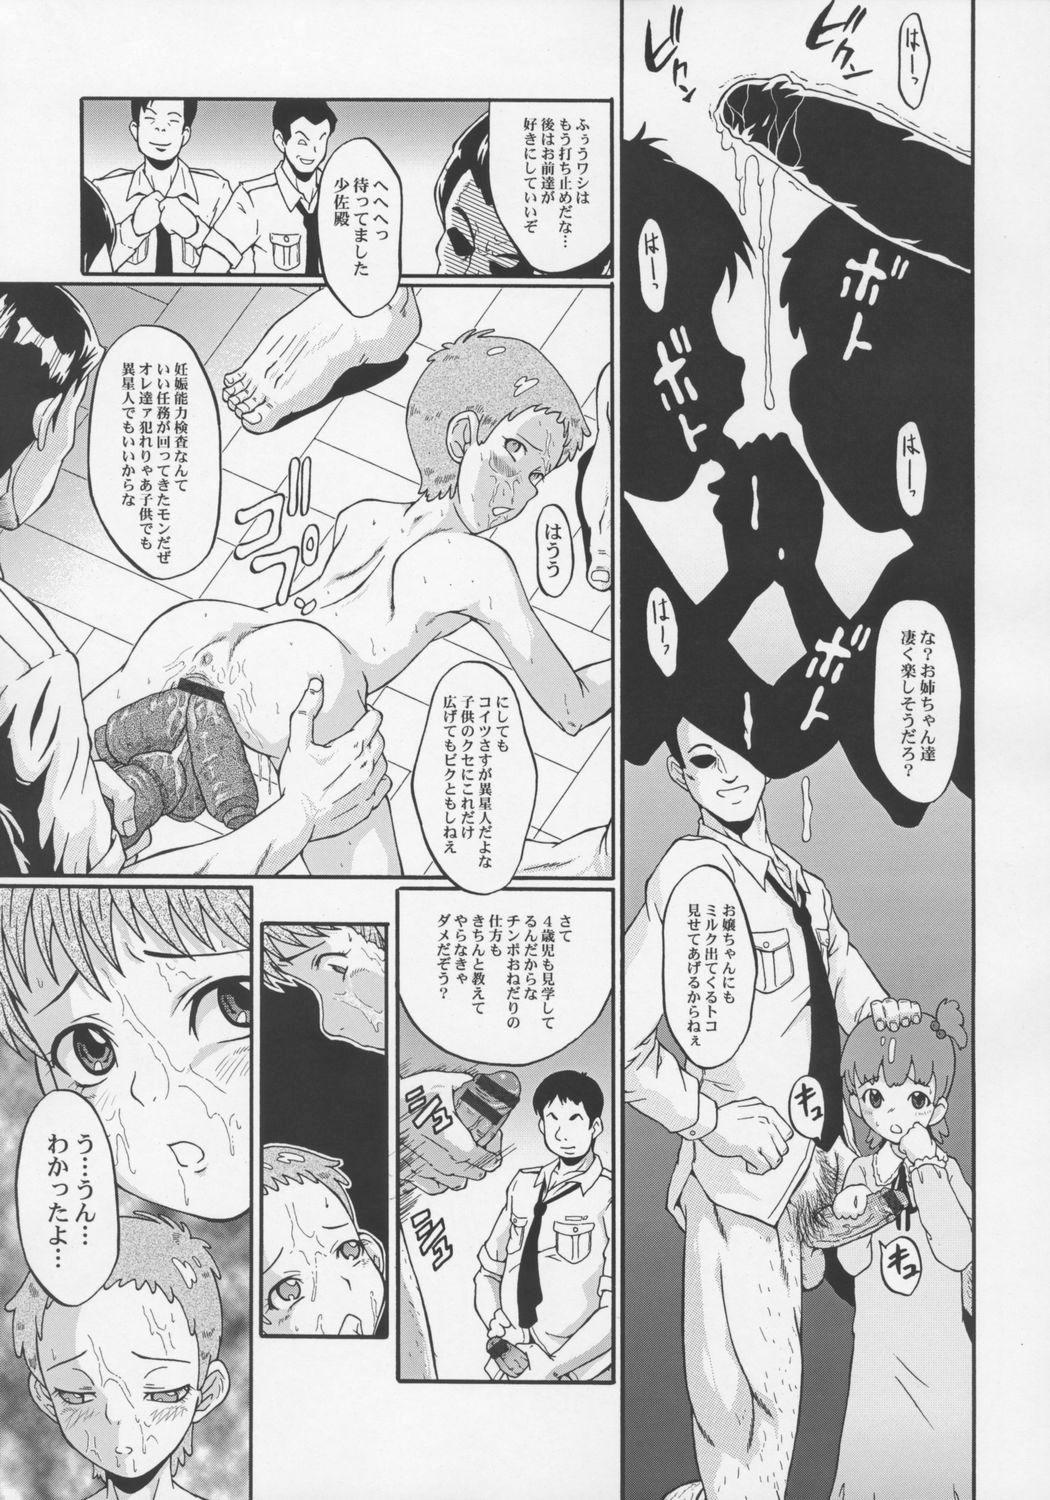 Homosexual Urabambi Vol. 33 - Hello, I Love You Don't Tell Me Your Name - Galactic drifter vifam Black Woman - Page 10